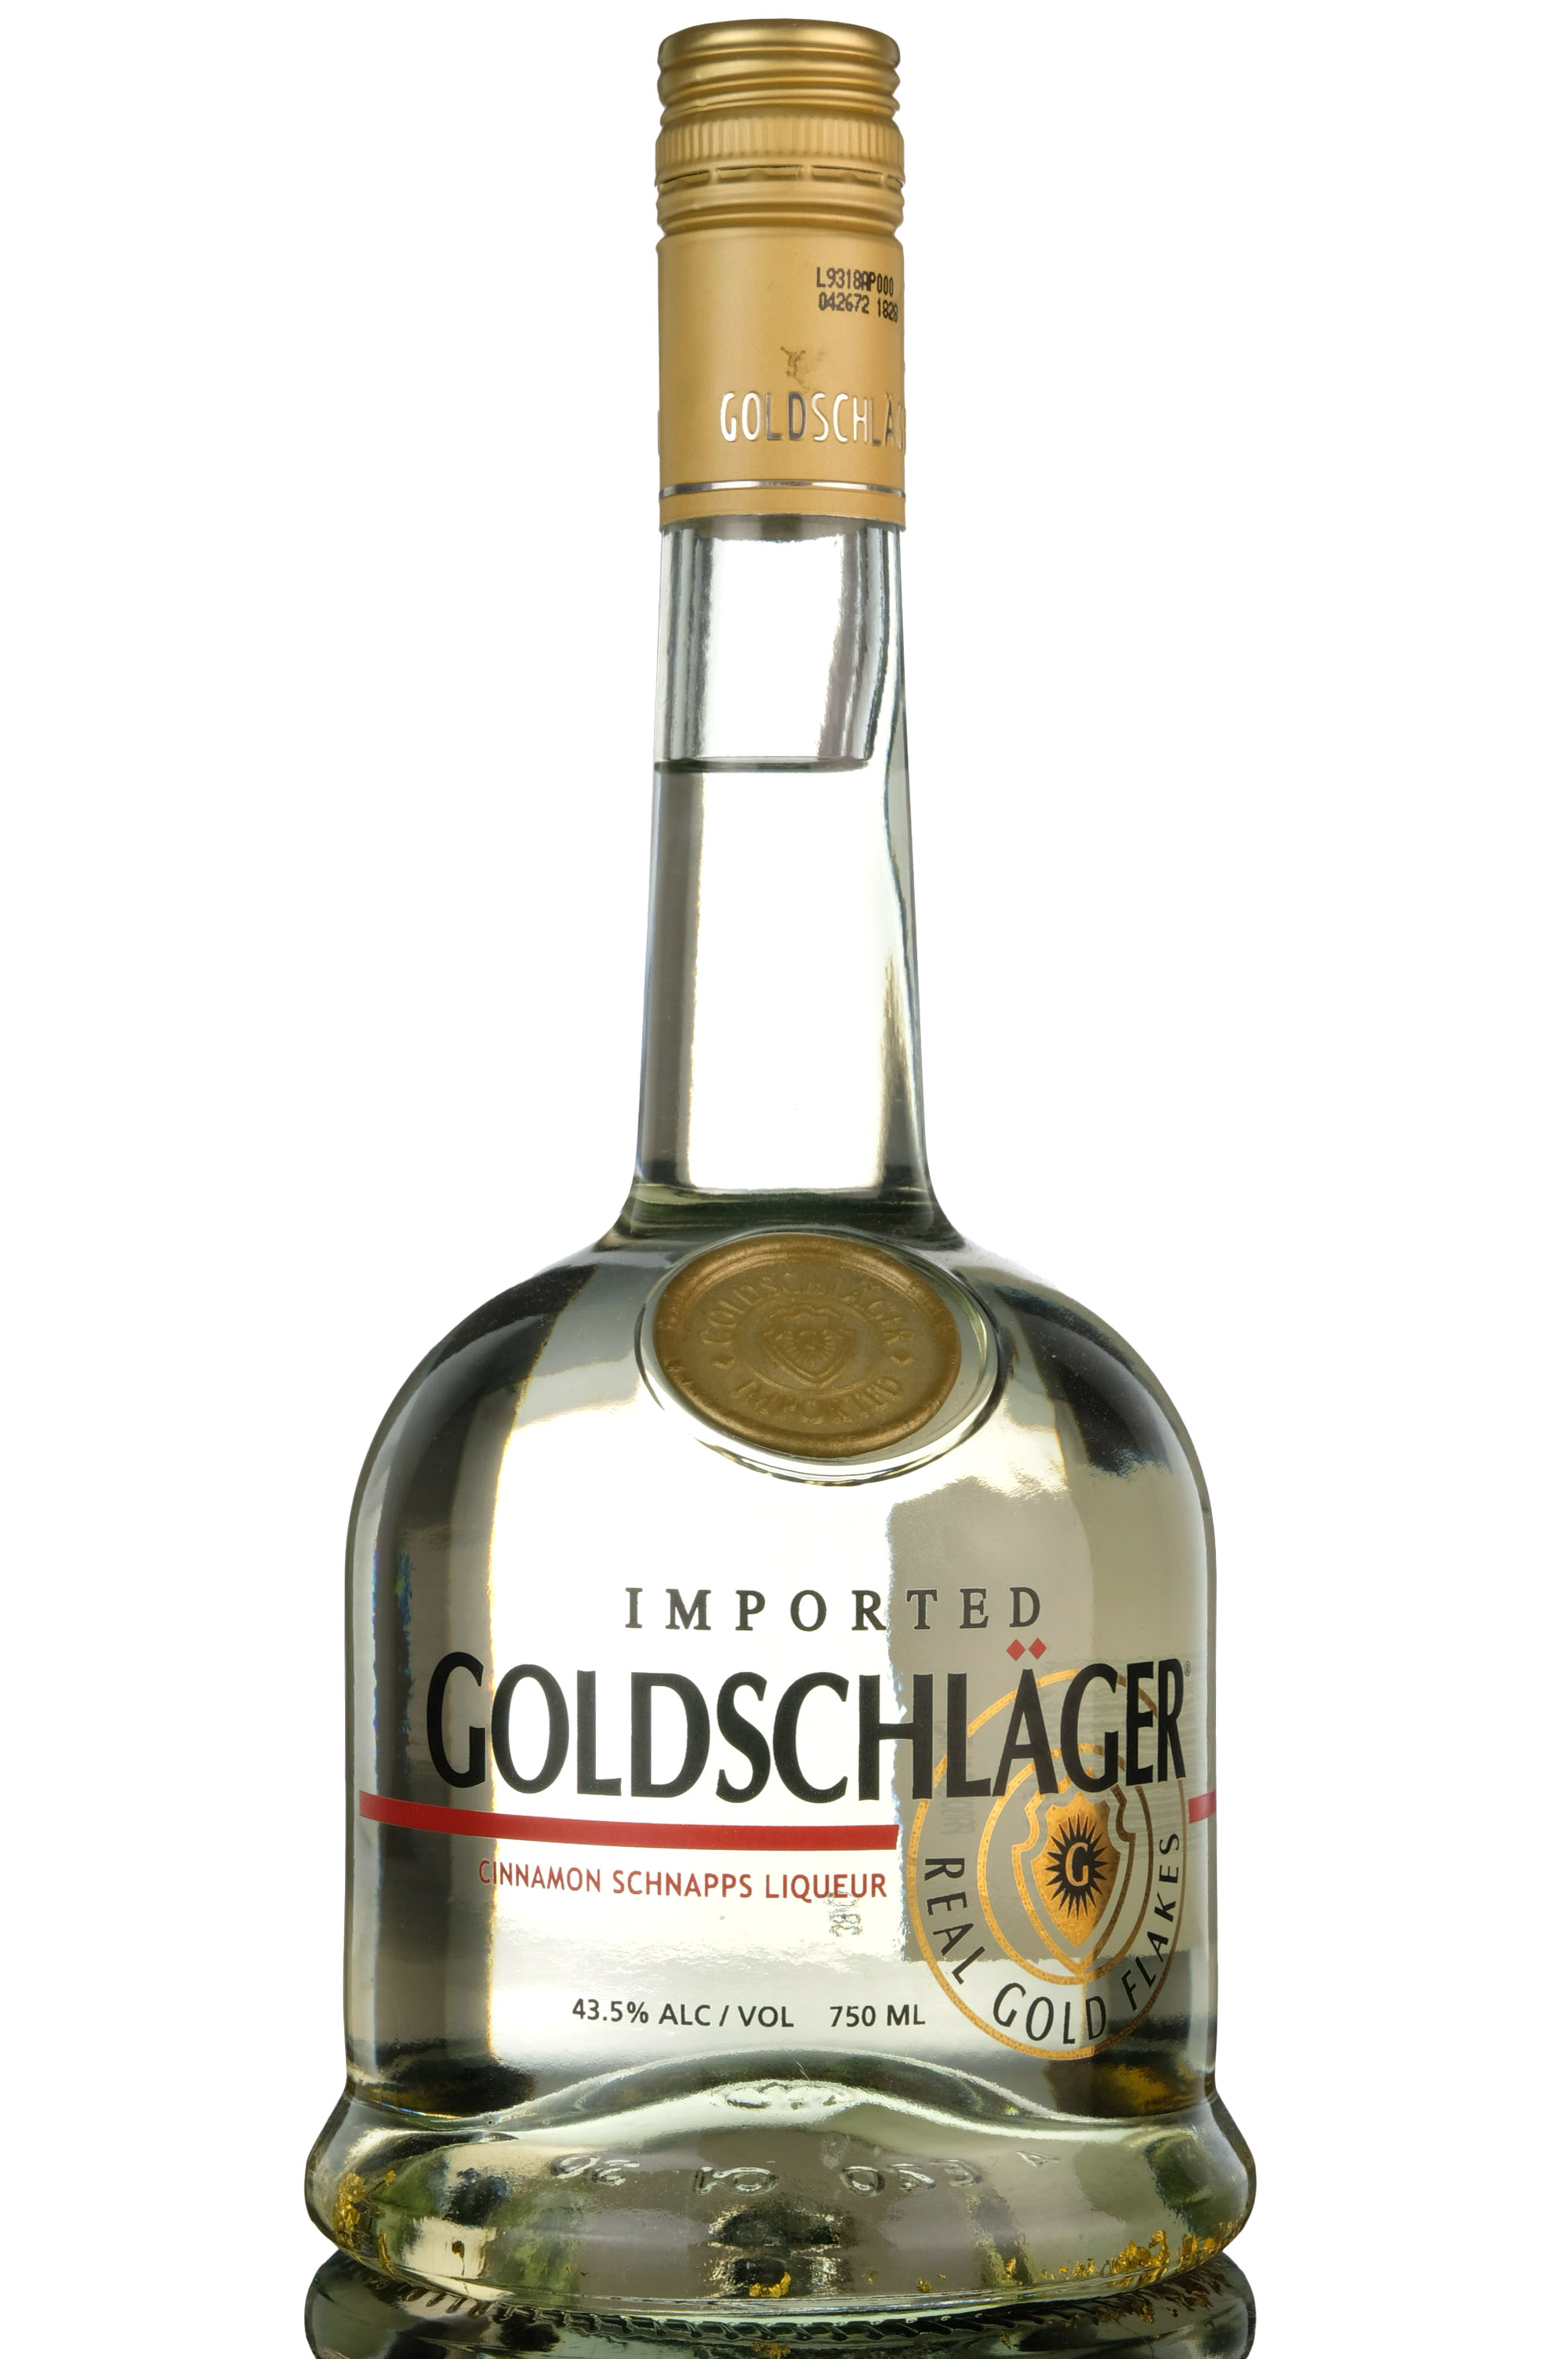 Goldschlager Cinnamon Schnapps Liqueur - Real Gold Flakes